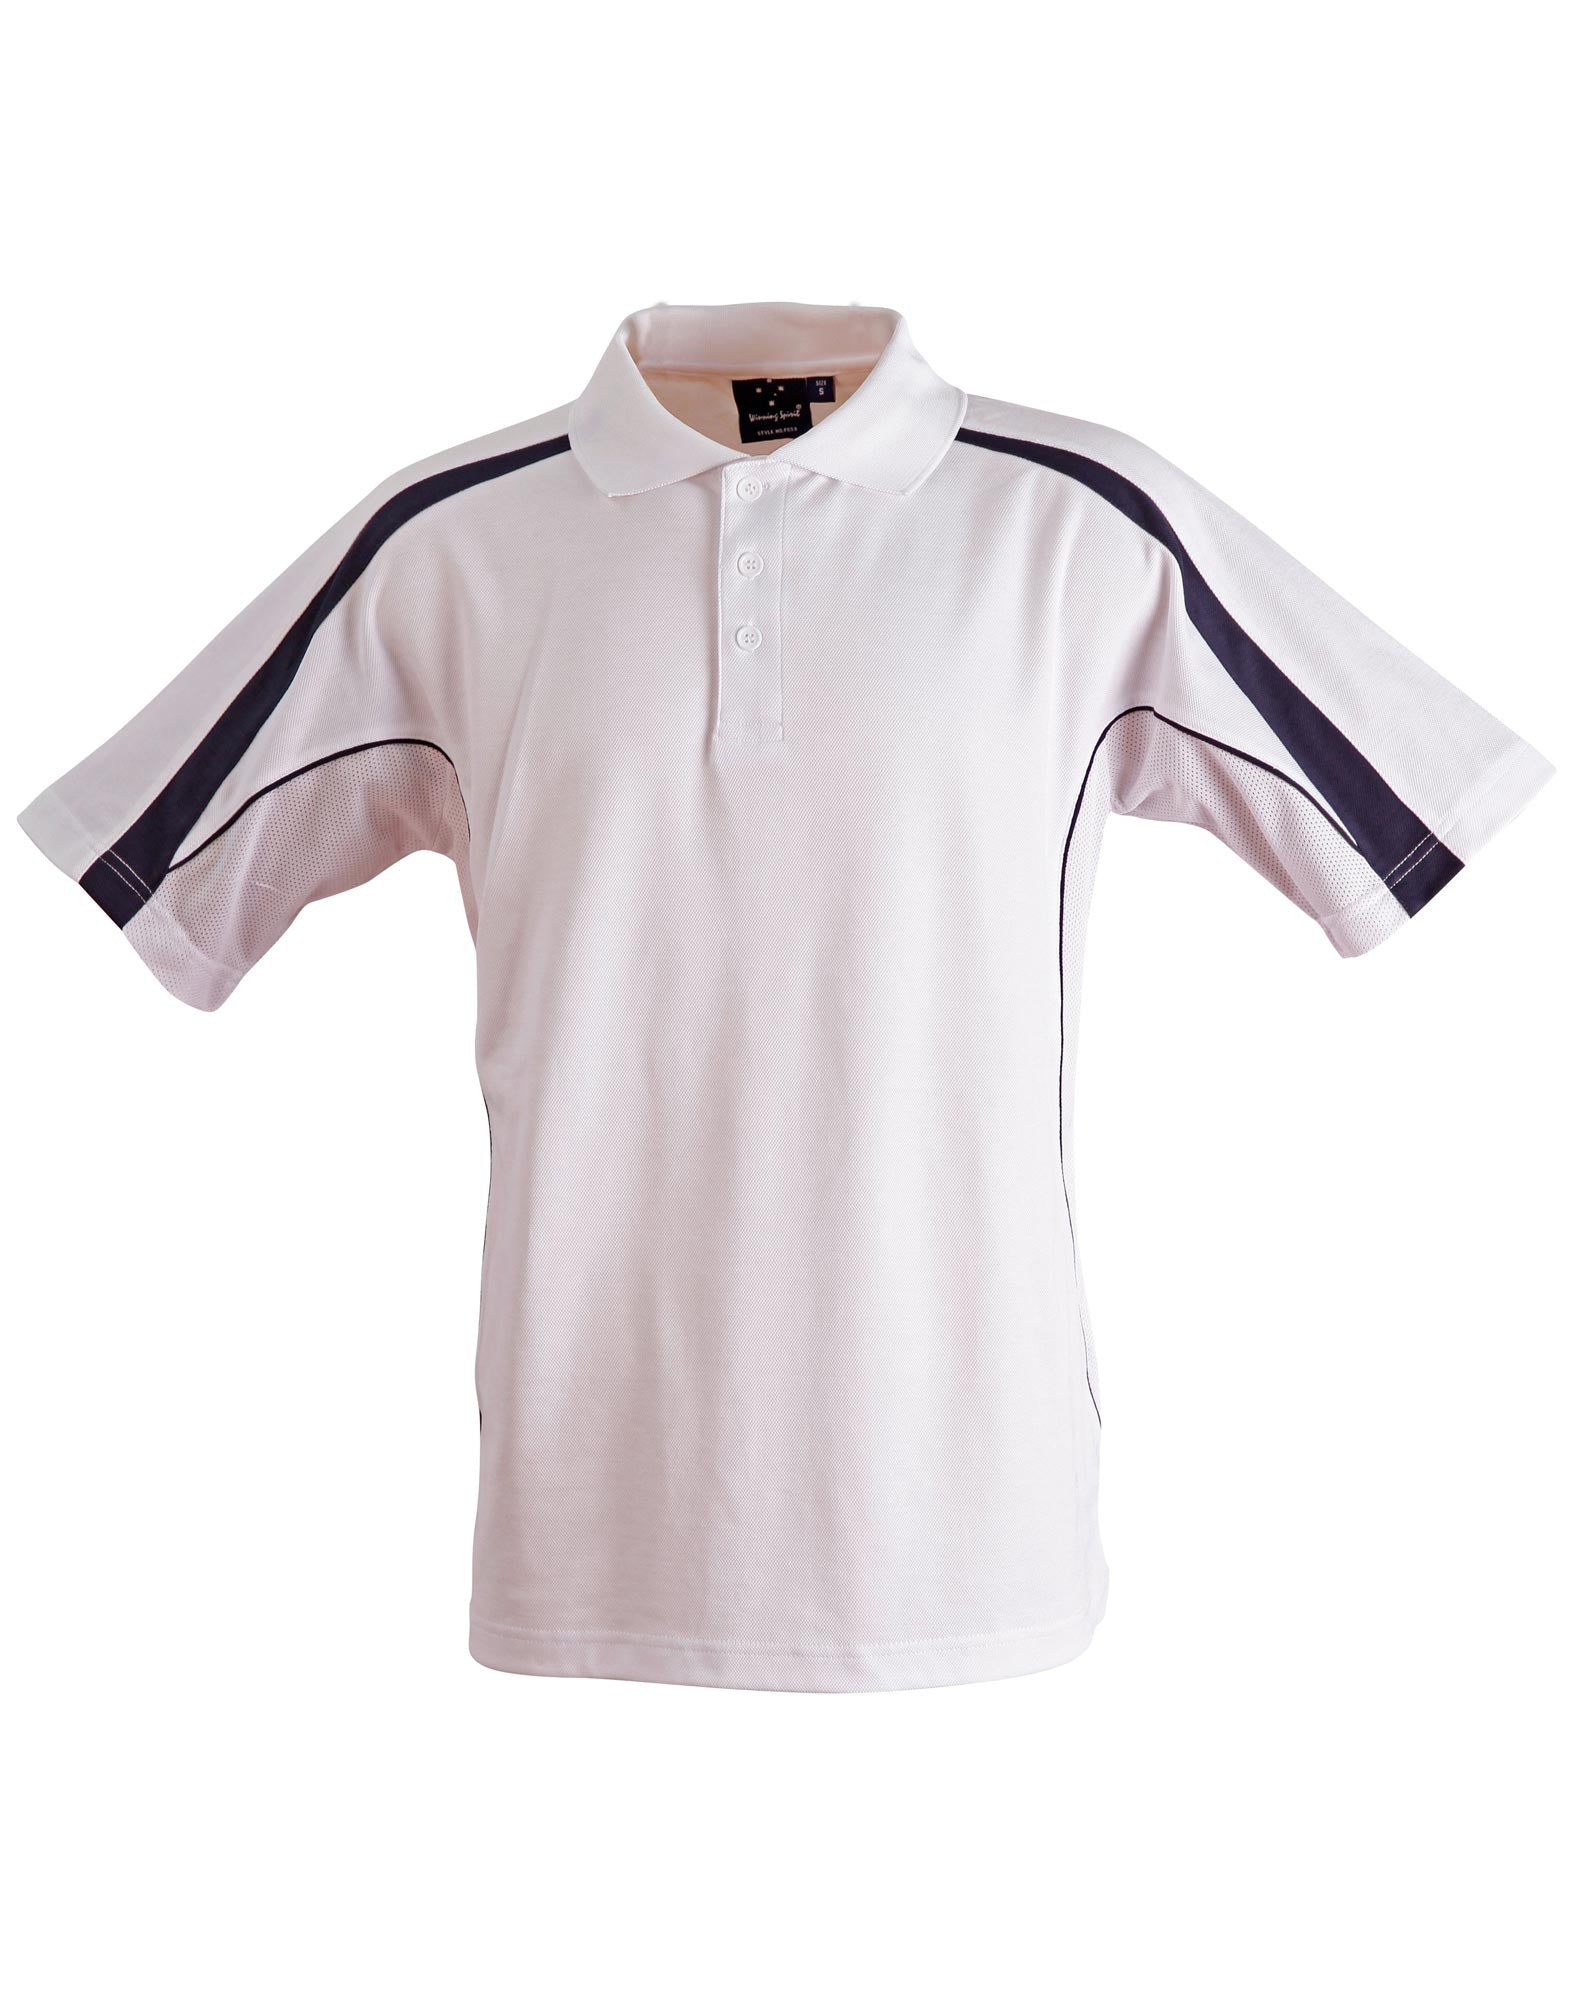 Legend Truedry Short Sleeve Polo Shirt - made by AIW